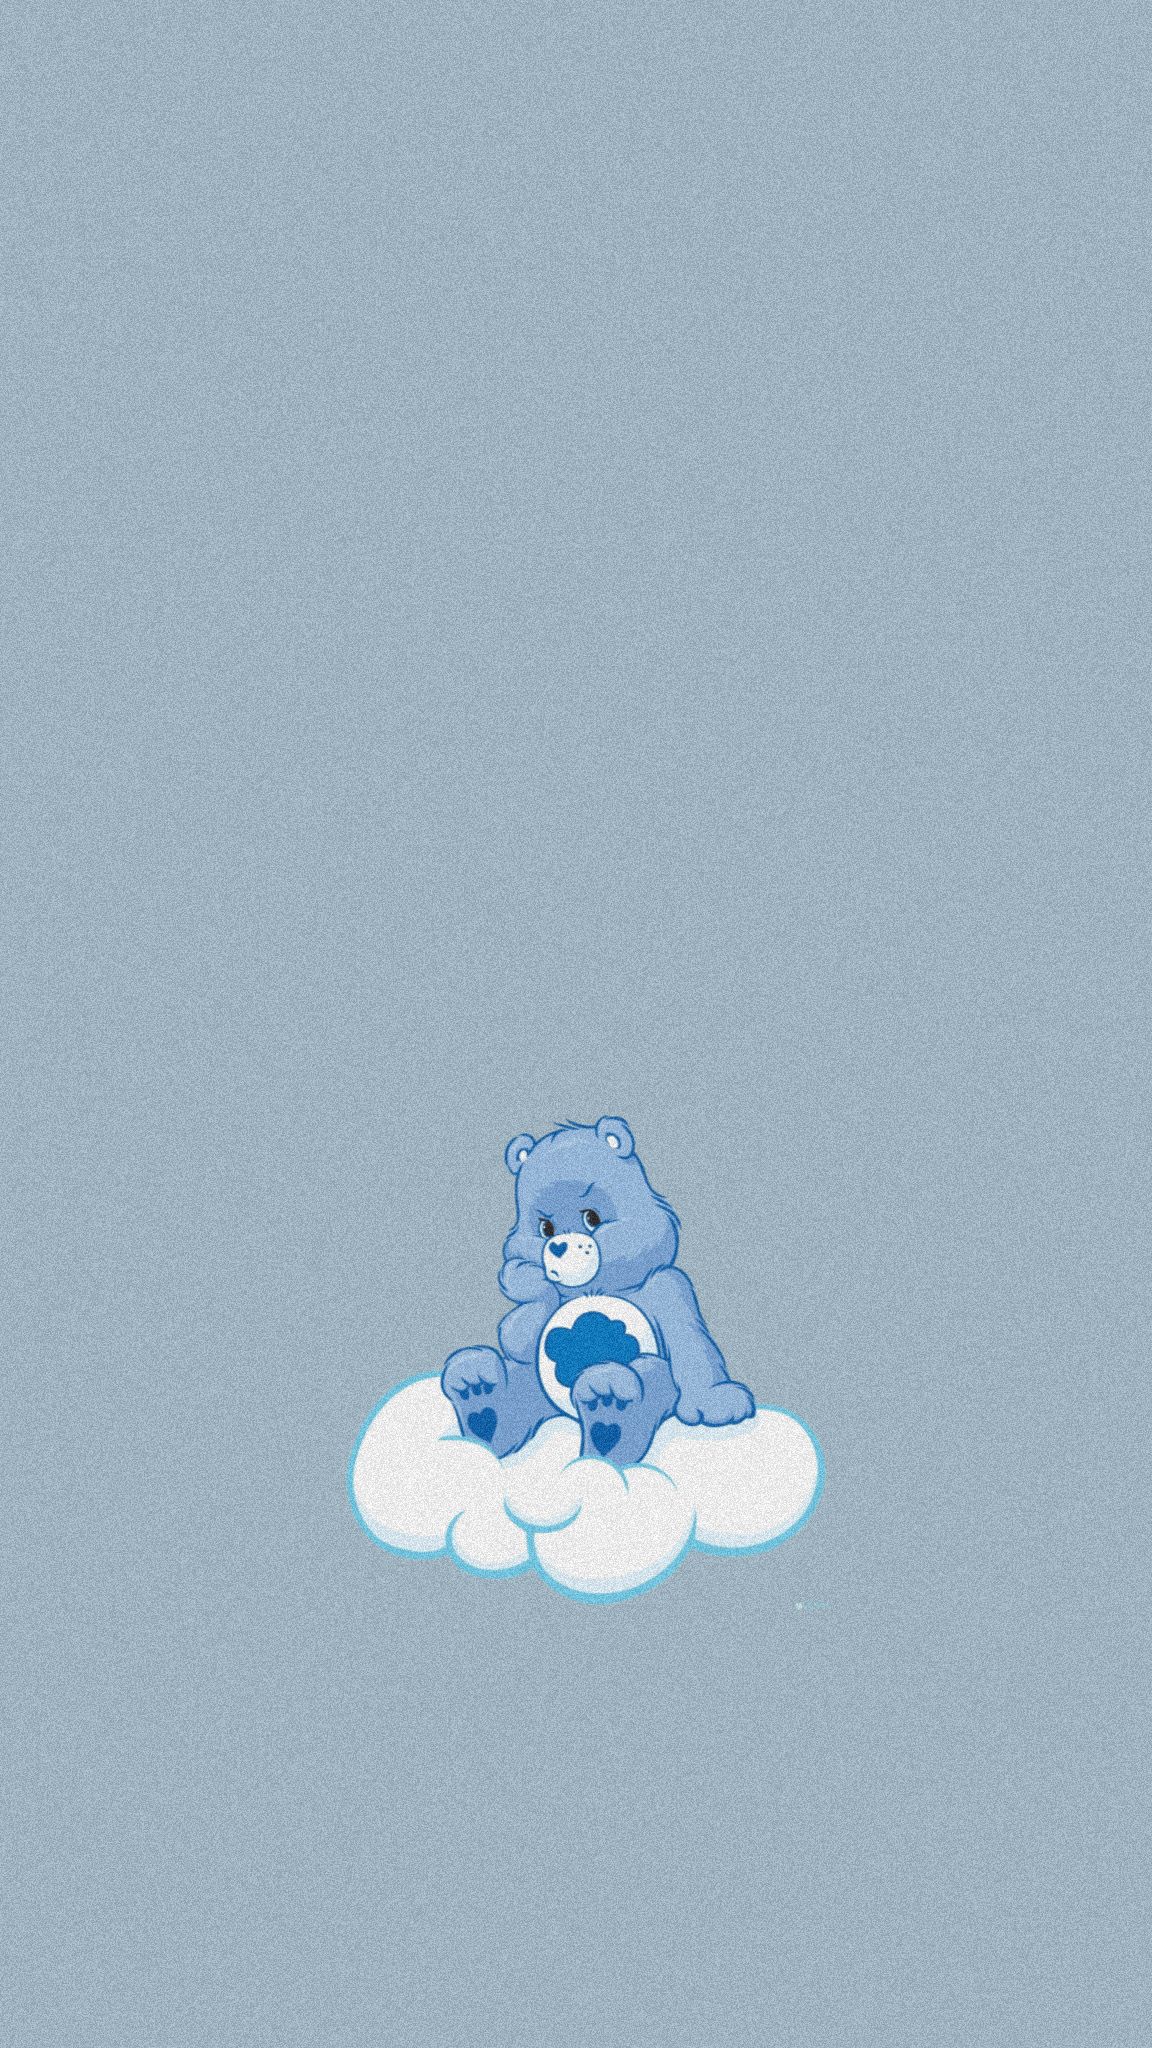 IPhone wallpaper of a blue bear sitting on a cloud - Care Bears